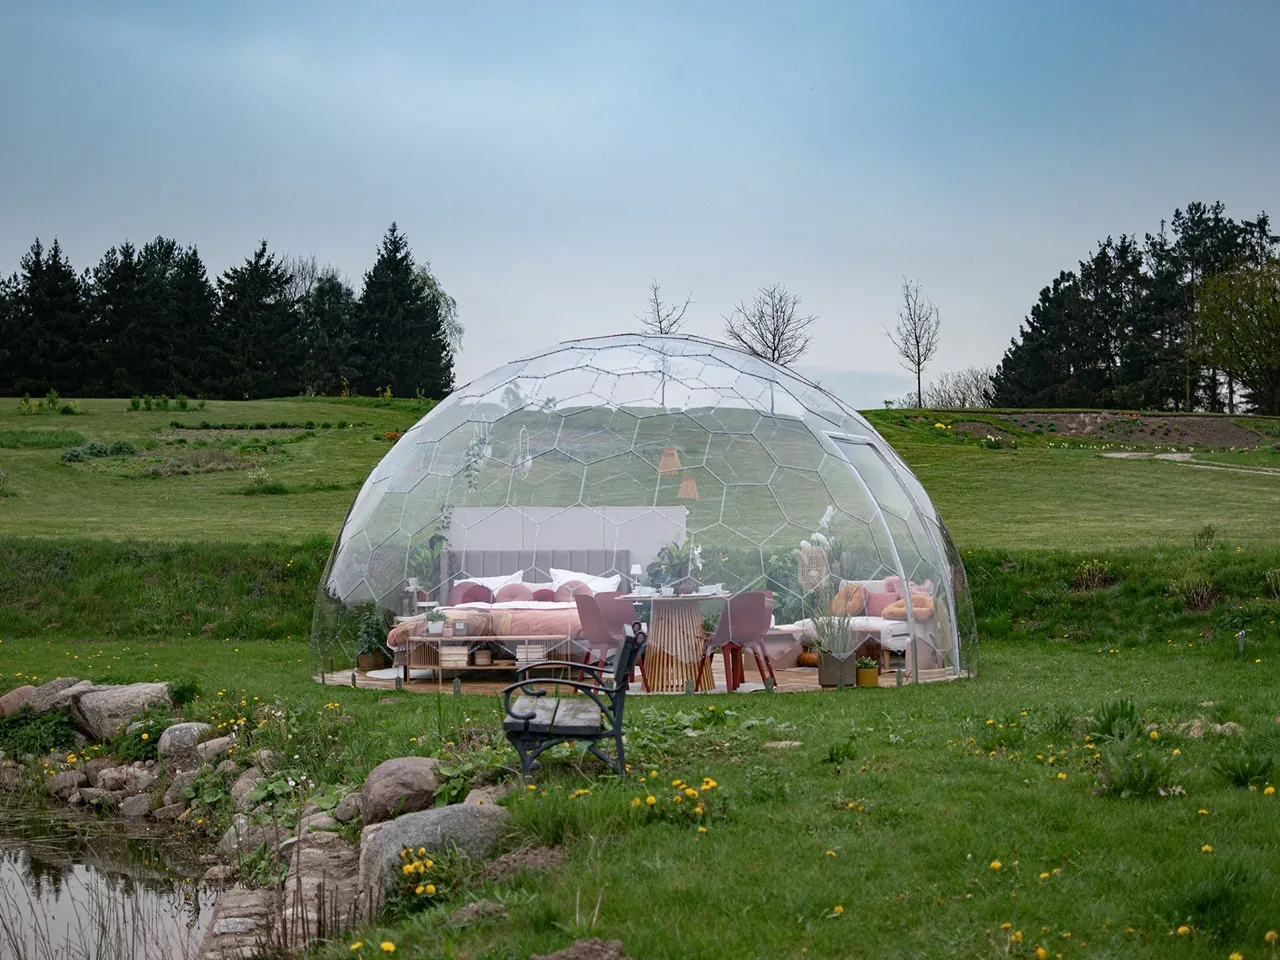 Introducing Hypedome L – Our Largest Geodesic Dome